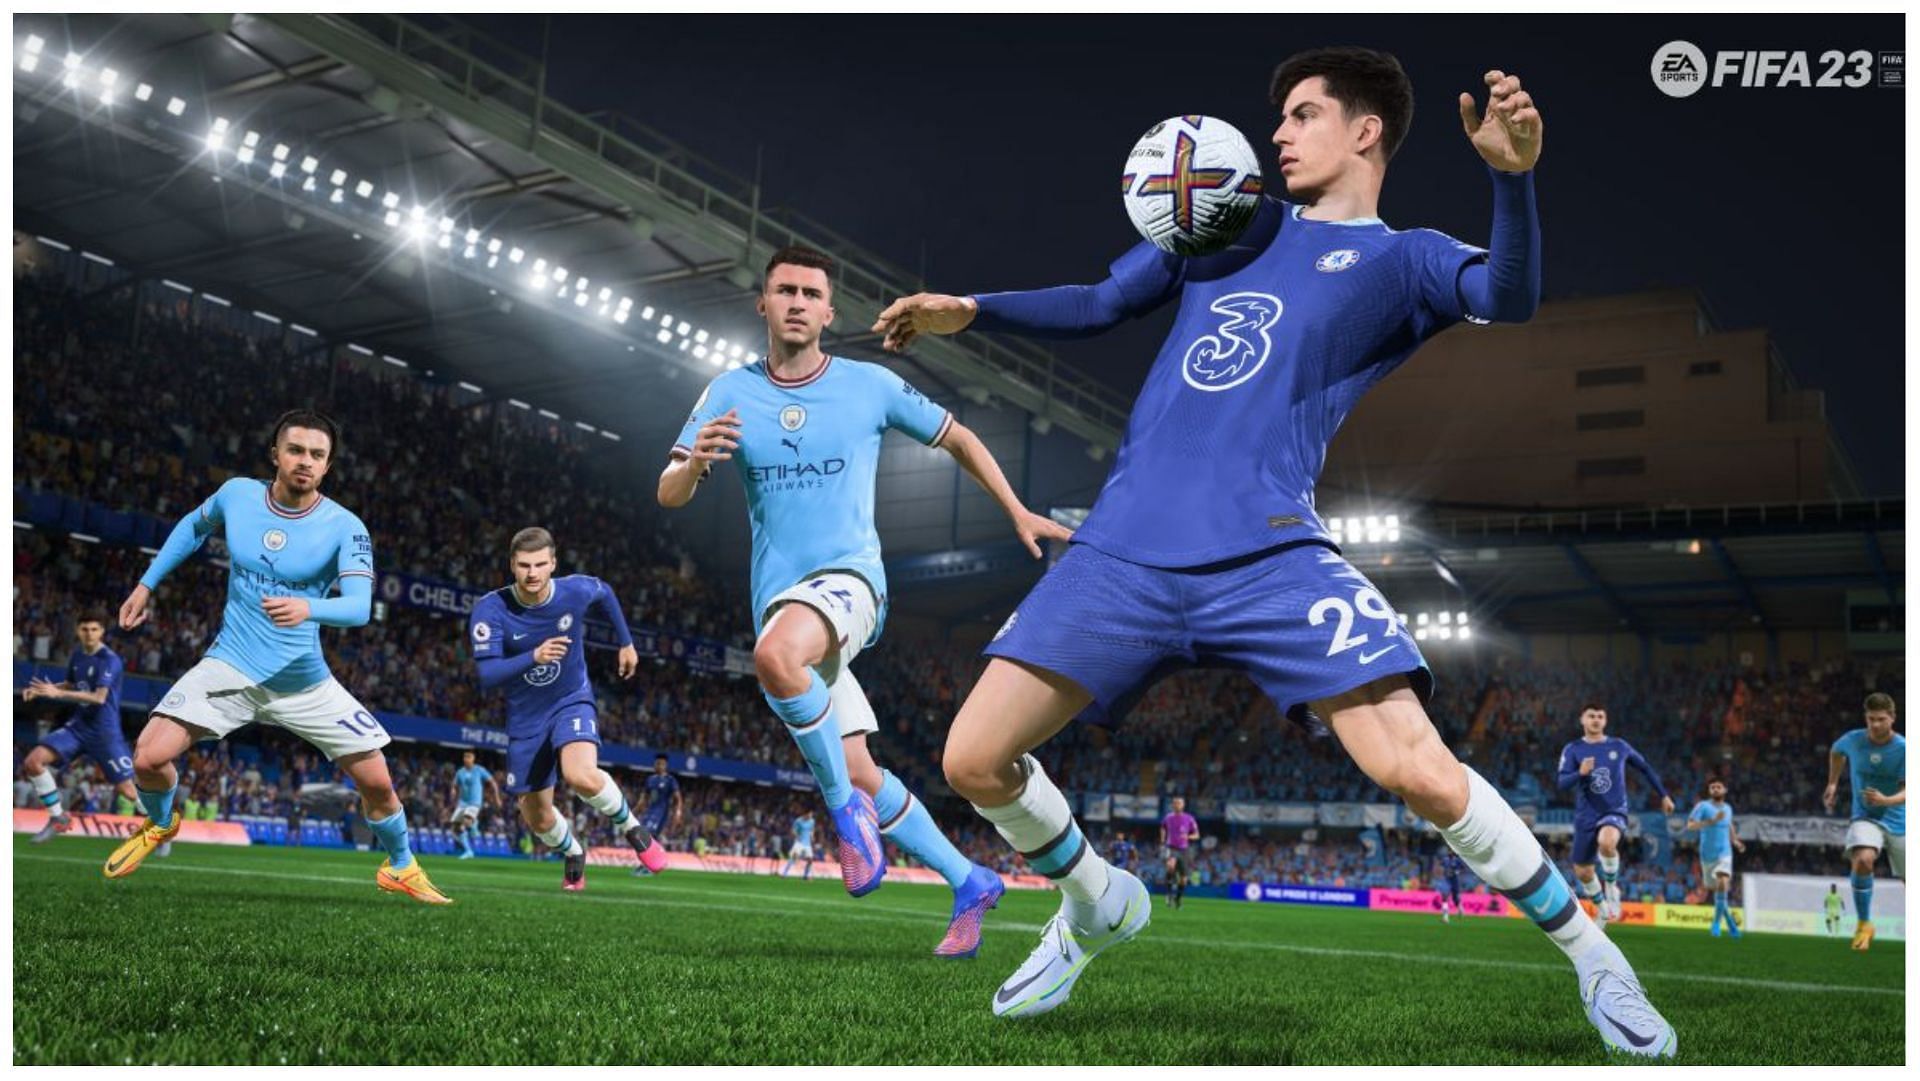 FIFA 23 will feature a brand-new game mode with exciting rewards on offer (Image via EA Sports)